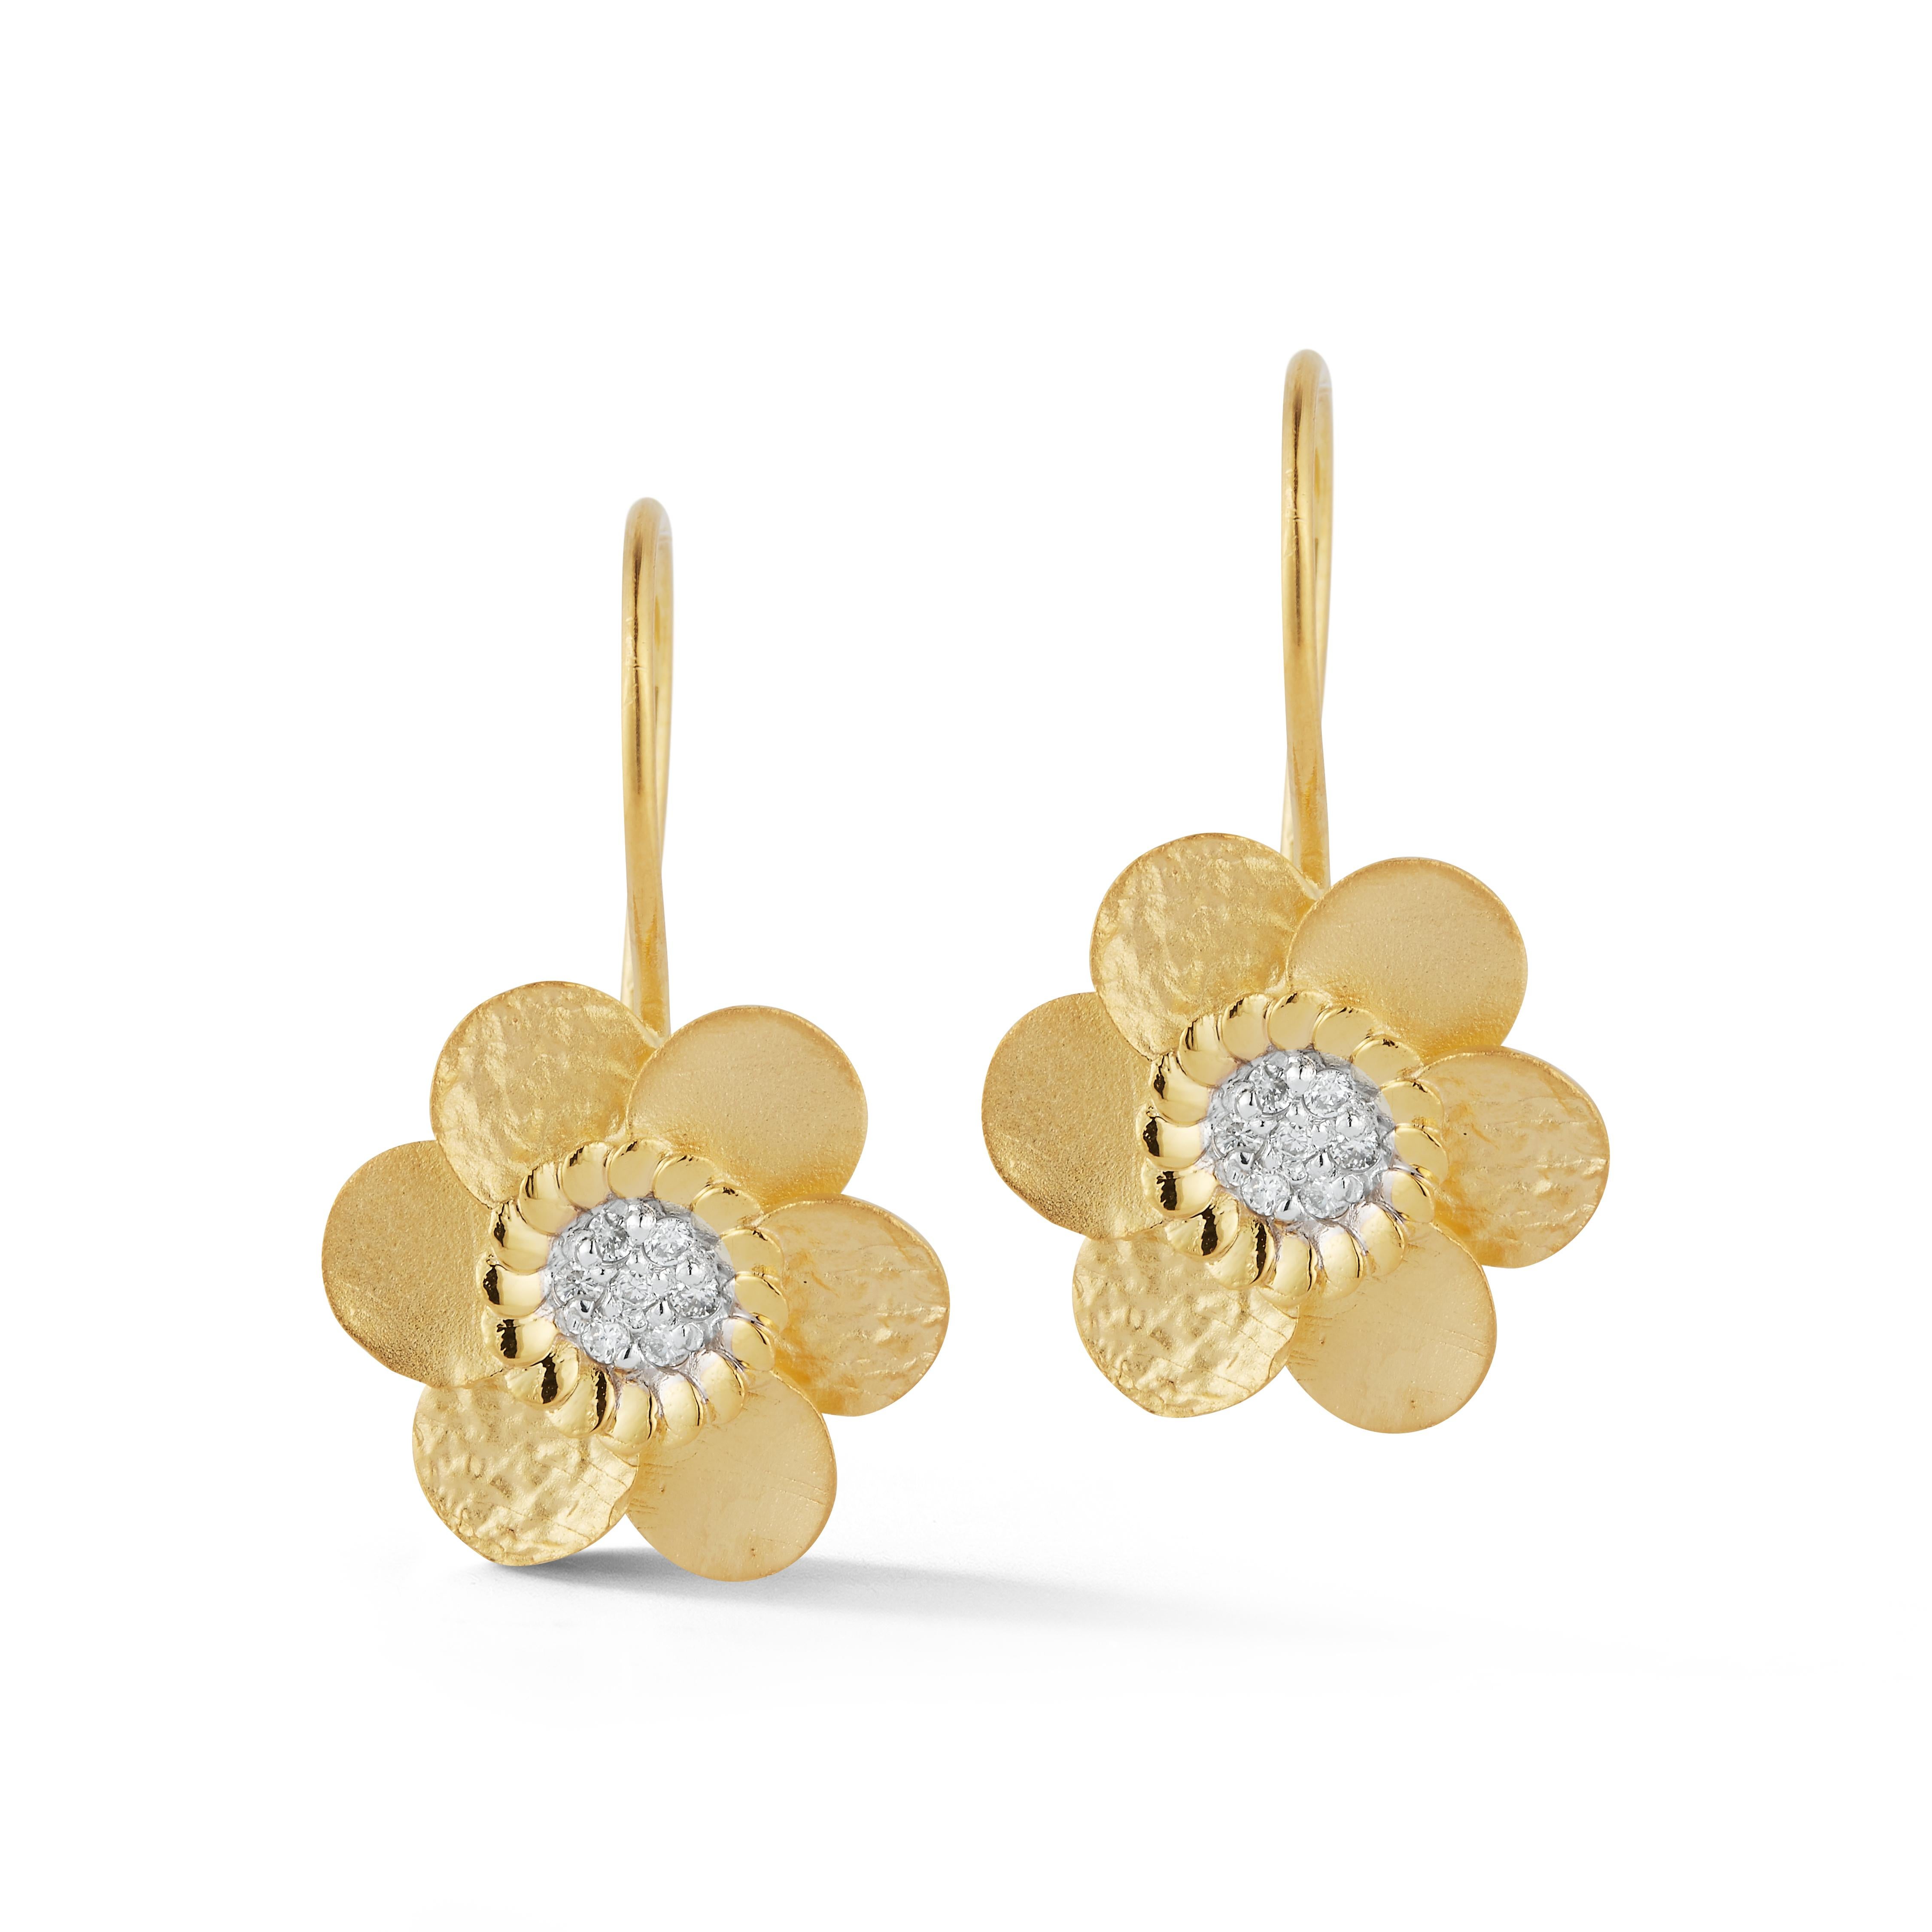 14 Karat Yellow Gold Hand-Crafted Mixed Polish, Matte And Hammer-Finished Daisy Earrings, Centered with 0.14 Carats of Pave Set Diamonds.
